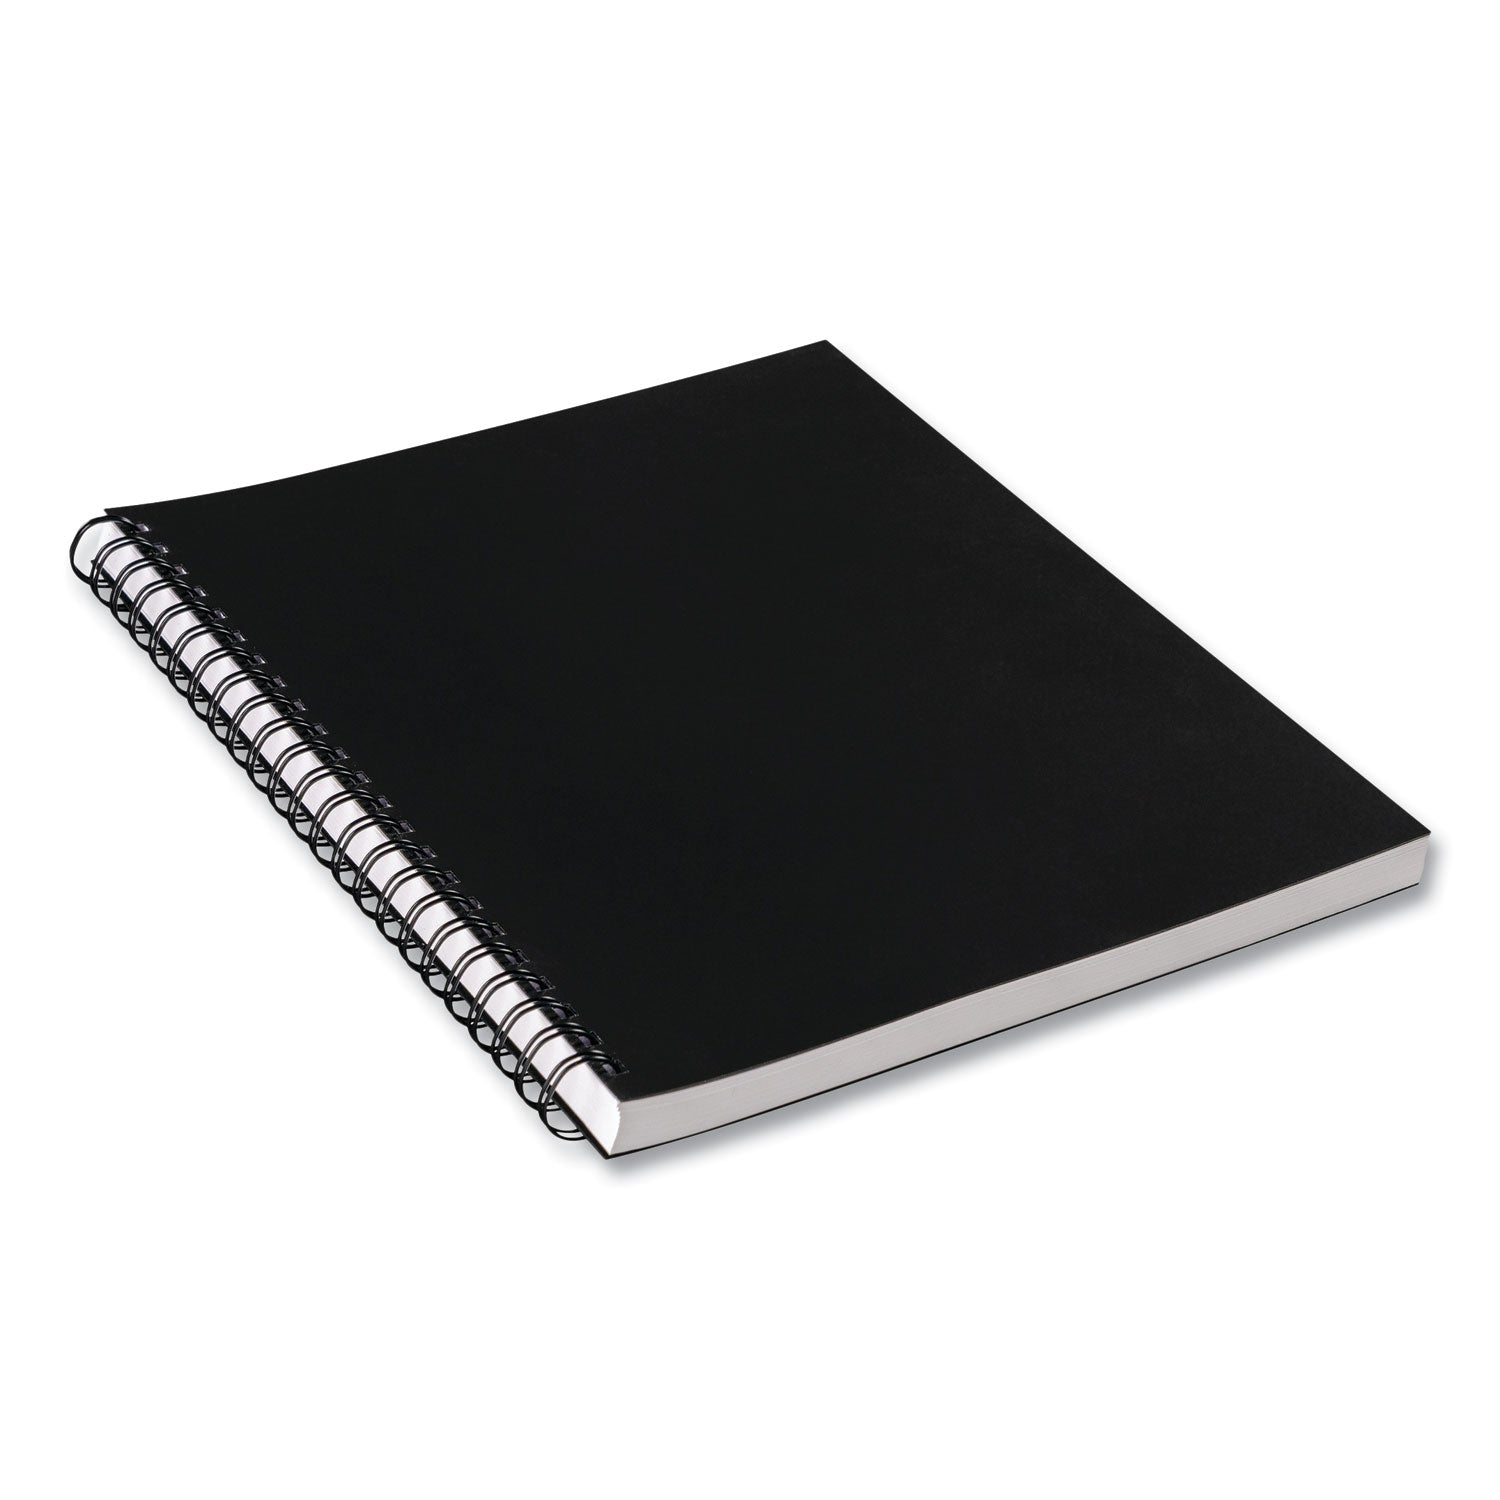 ucreate-poly-cover-sketch-book-43-lb-cover-paper-stock-black-cover-75-sheets-per-book-12-x-9-sheets_pacpcar37088 - 2